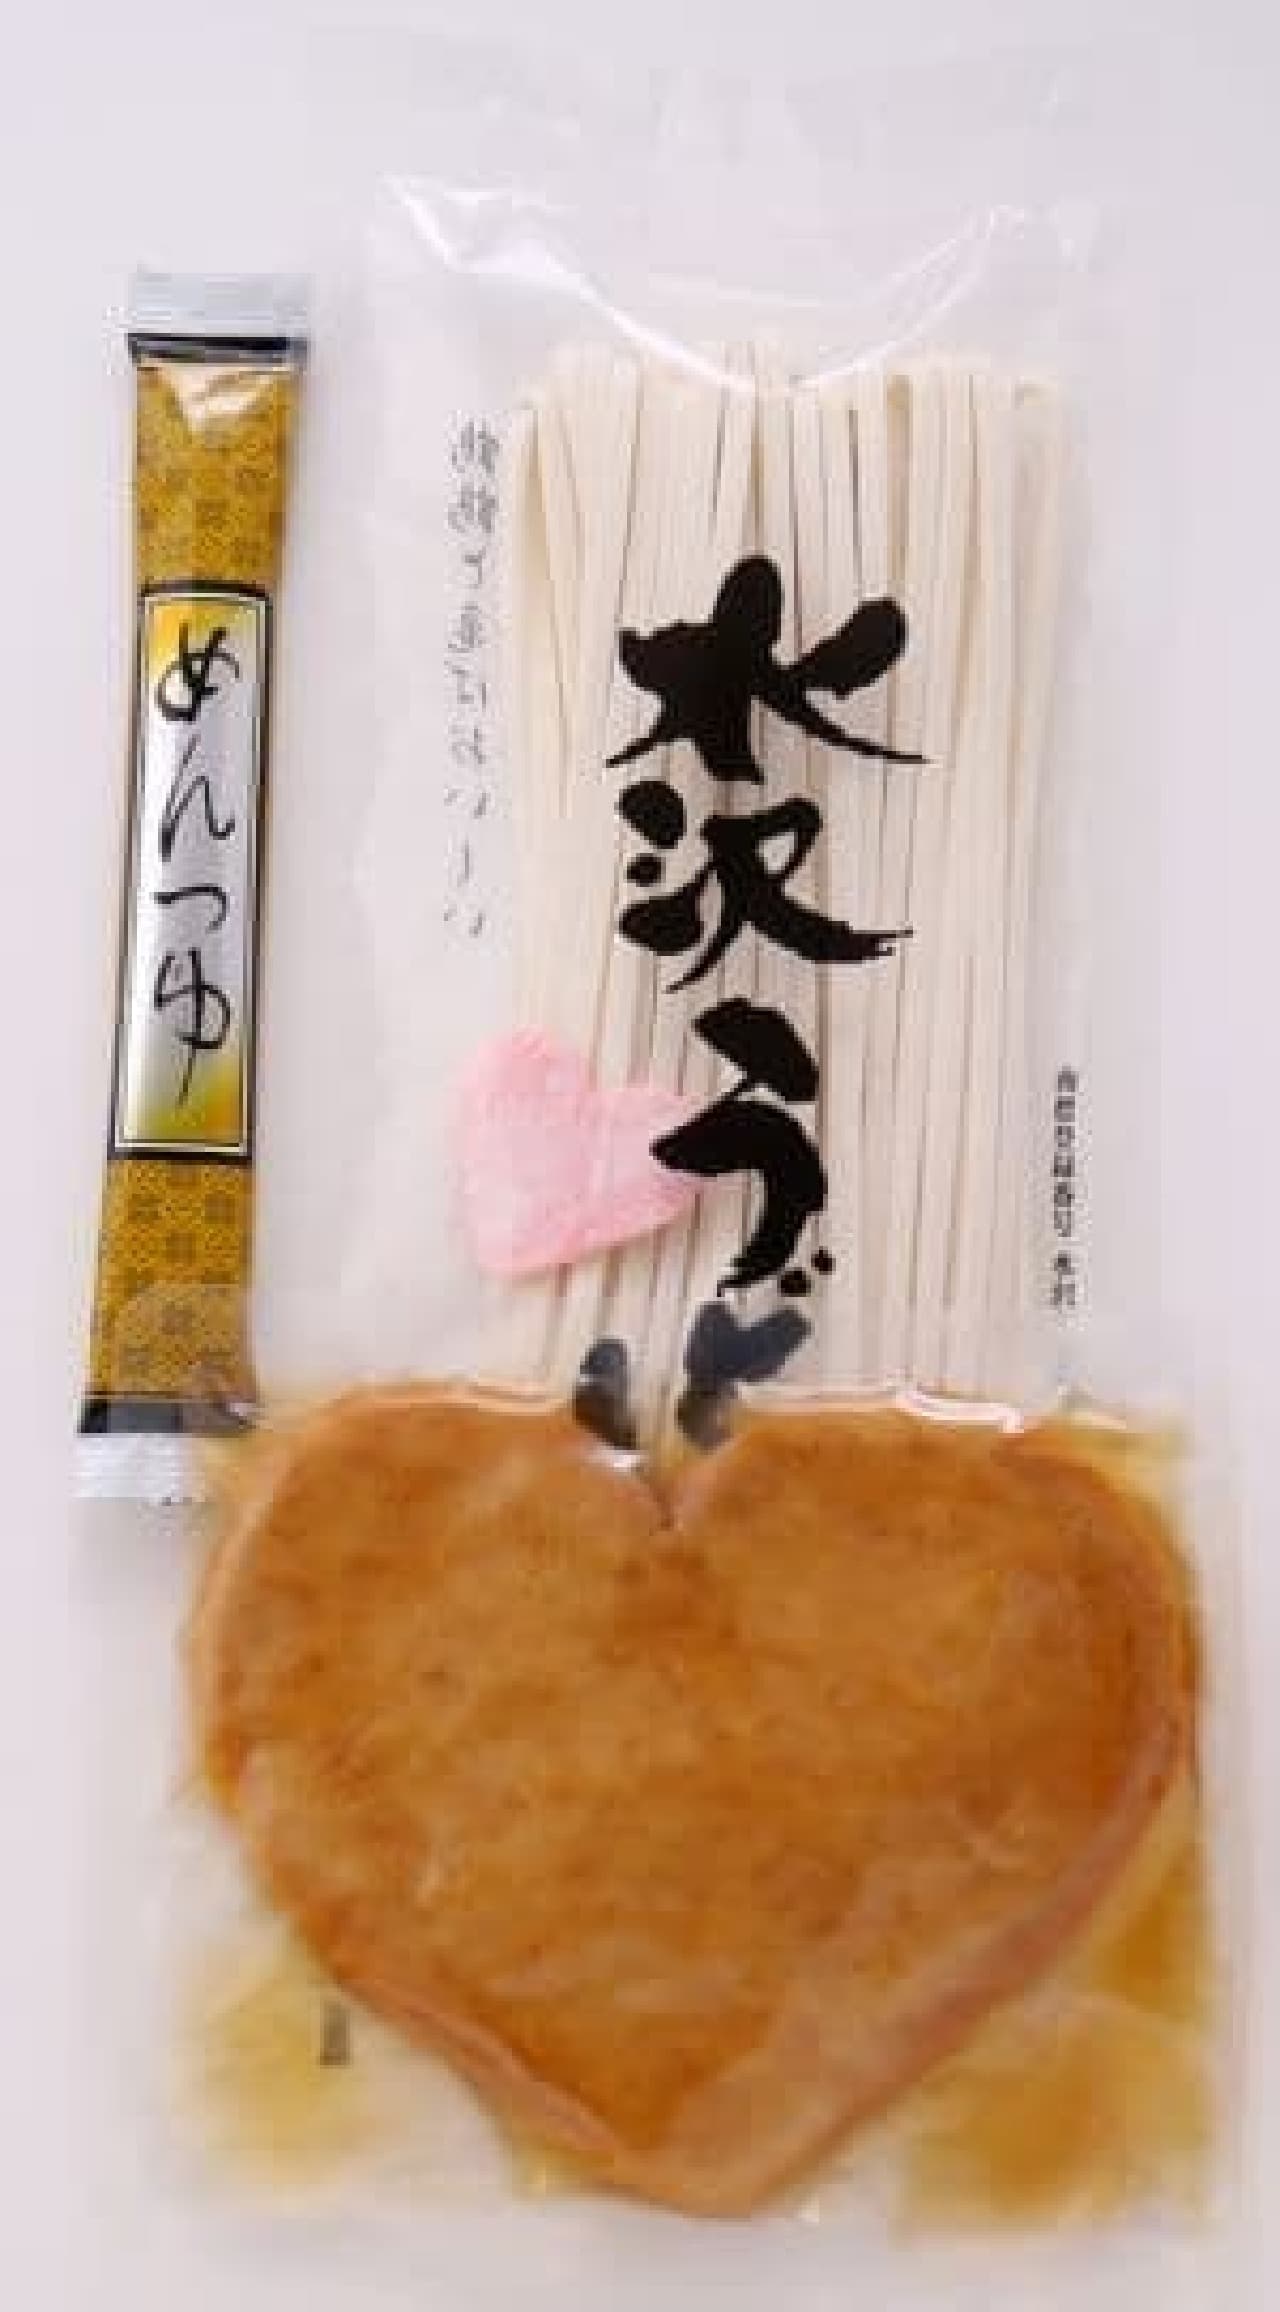 Udon "LOVE Fox" for Valentine's Day from Osawaya